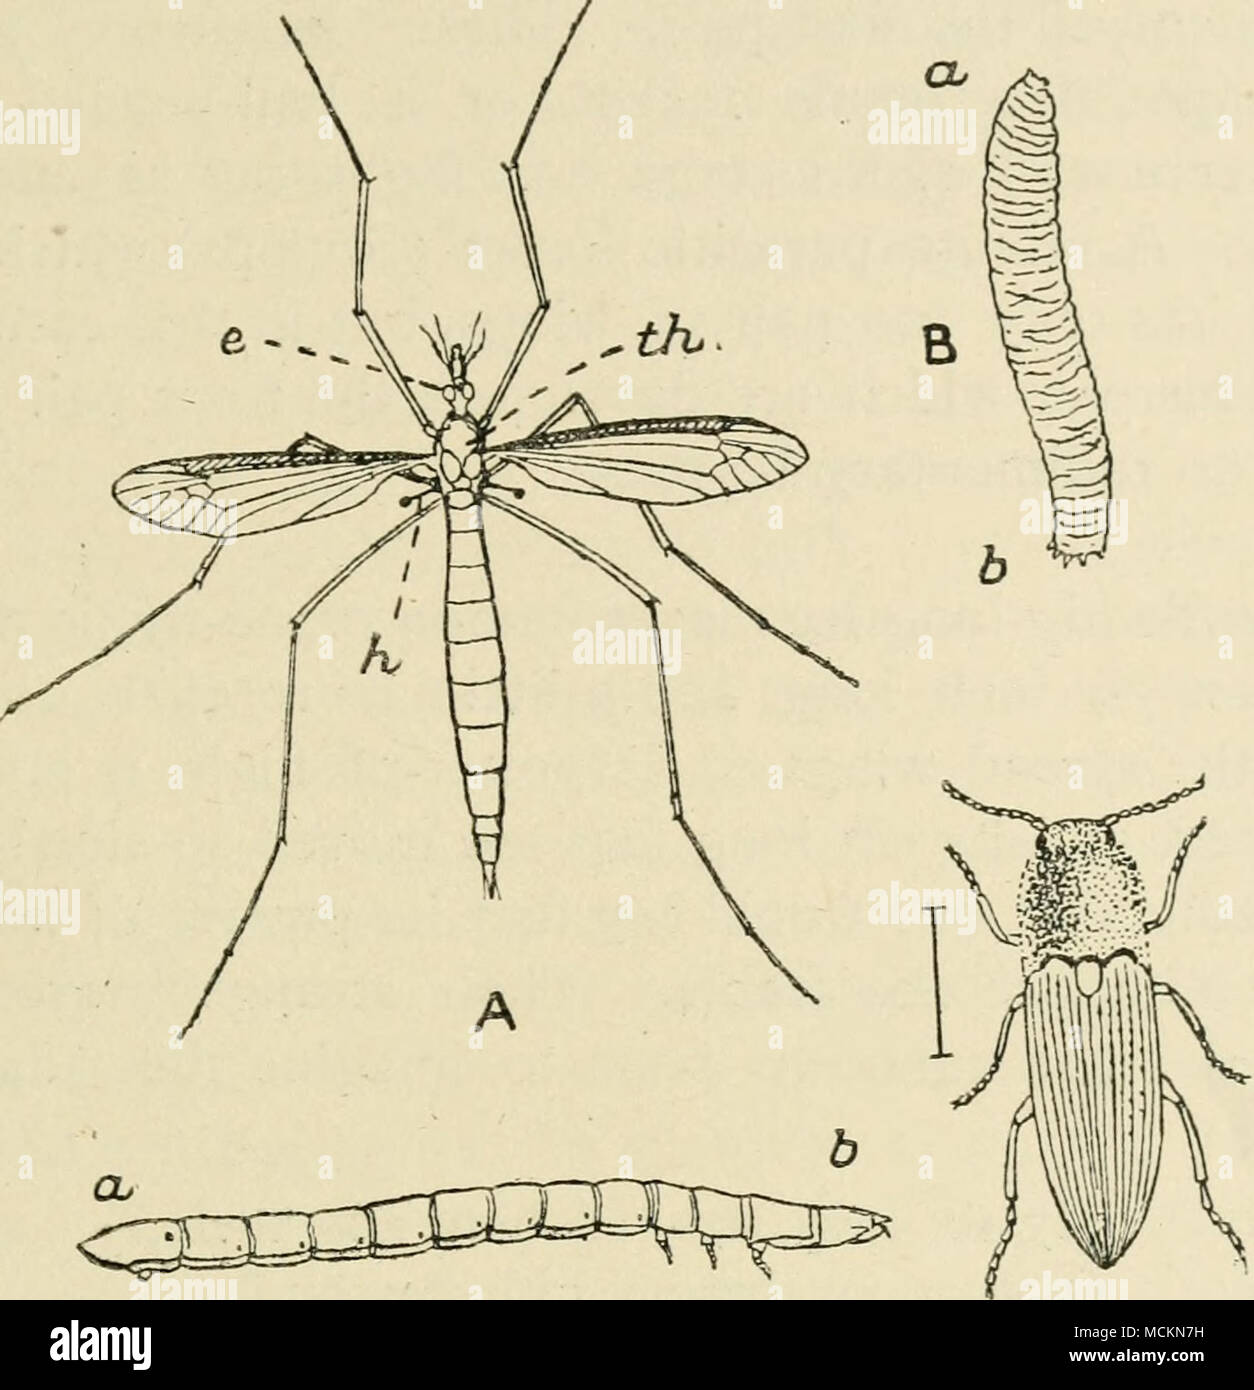 . D ^ Fig. 22. A, The Crane-fly (Daddy-Long-Legs), Tipula oleracea. e, the left eye ; h, one of the balancers or &quot; halteres,&quot; which are th, the thorax. Natural the modified second pair of wings ; head B, The &quot;Leather-jacket,&quot; the grub of the crane-fly. b, tail. Natural size. C, The Click-beetle or Skip-jack, Elater obscurus. The line beside it shows its natural size. D, The true Wire-worm or grub of the click-beetles. Enlarged to four times the natural length, a, tail ; b, head. difficult to see this dwindled pair of wings, which lie close behind the first or large pair, an Stock Photo